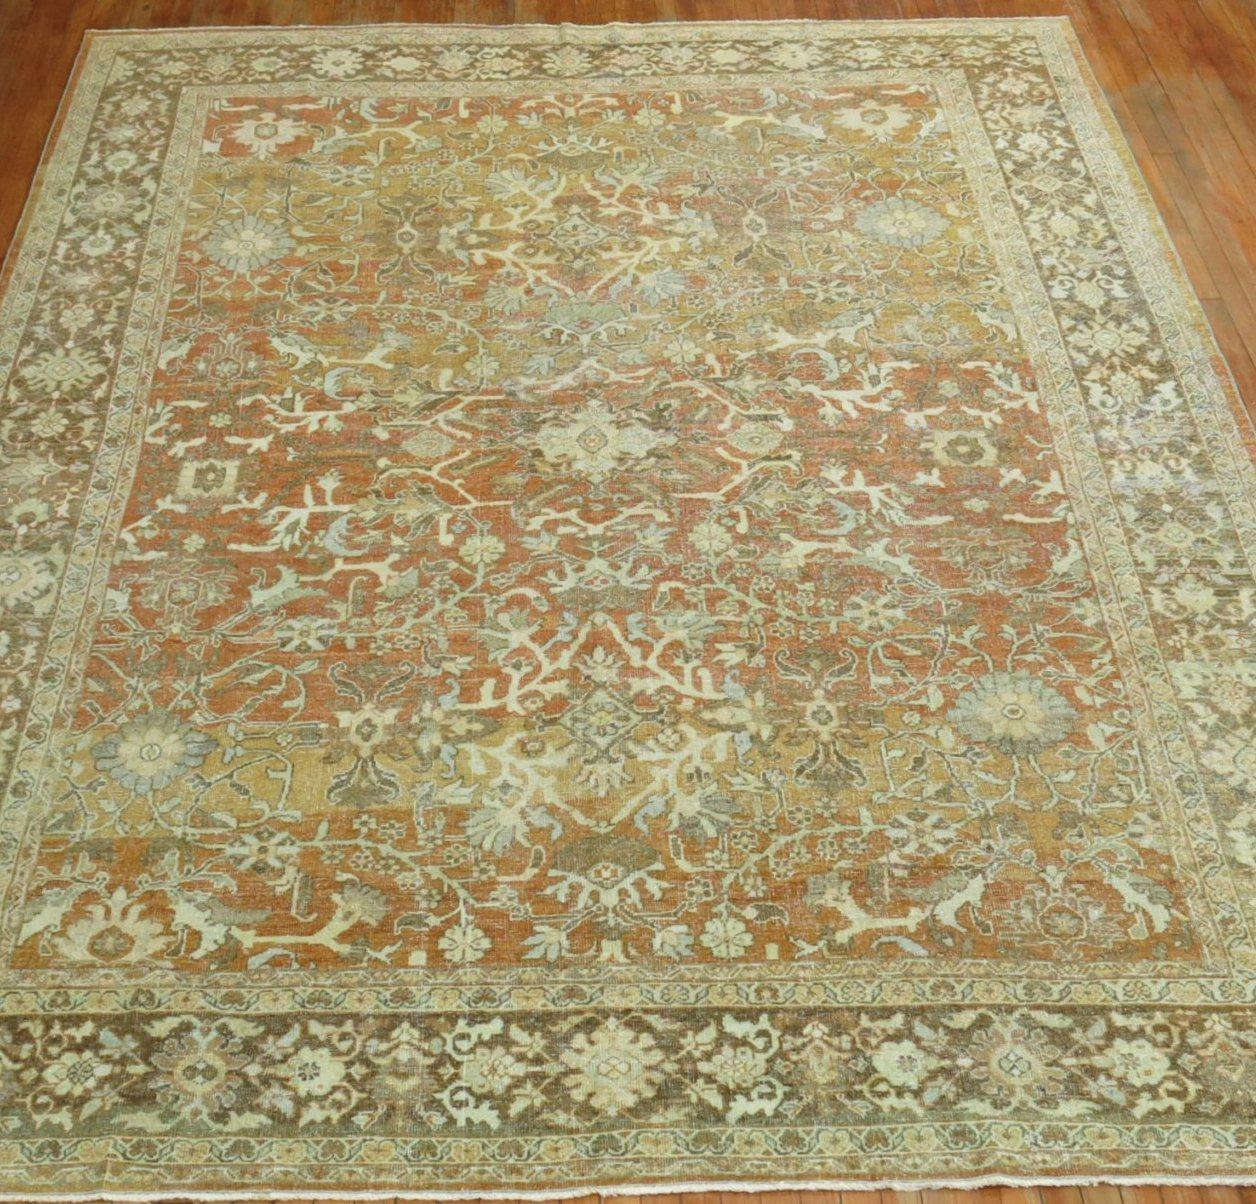 Room size early 20th century antique Persian Mahal rug with an all-over design in predominant terracotta's and brown accents. 

Measures: 9' x 12'1